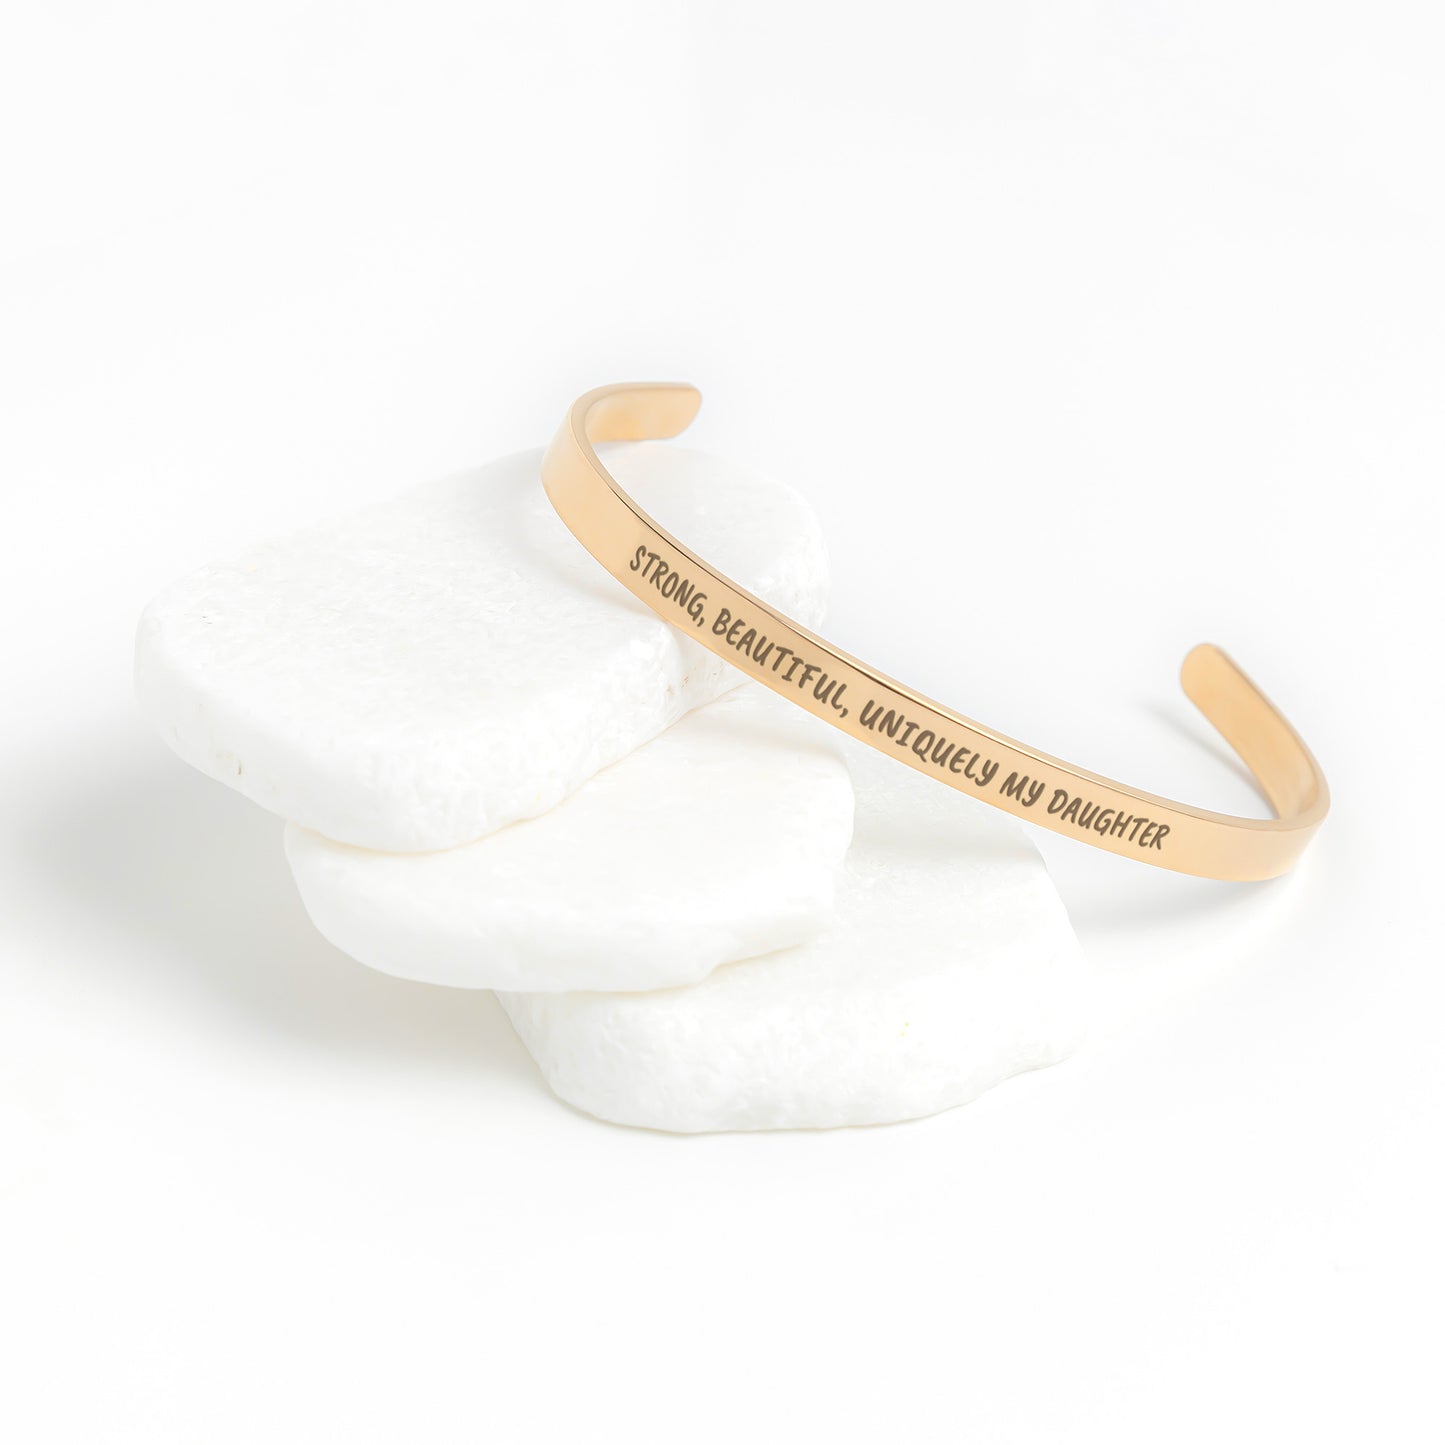 Strong, Beautiful, Uniquely My Daughter Cuff Bracelet